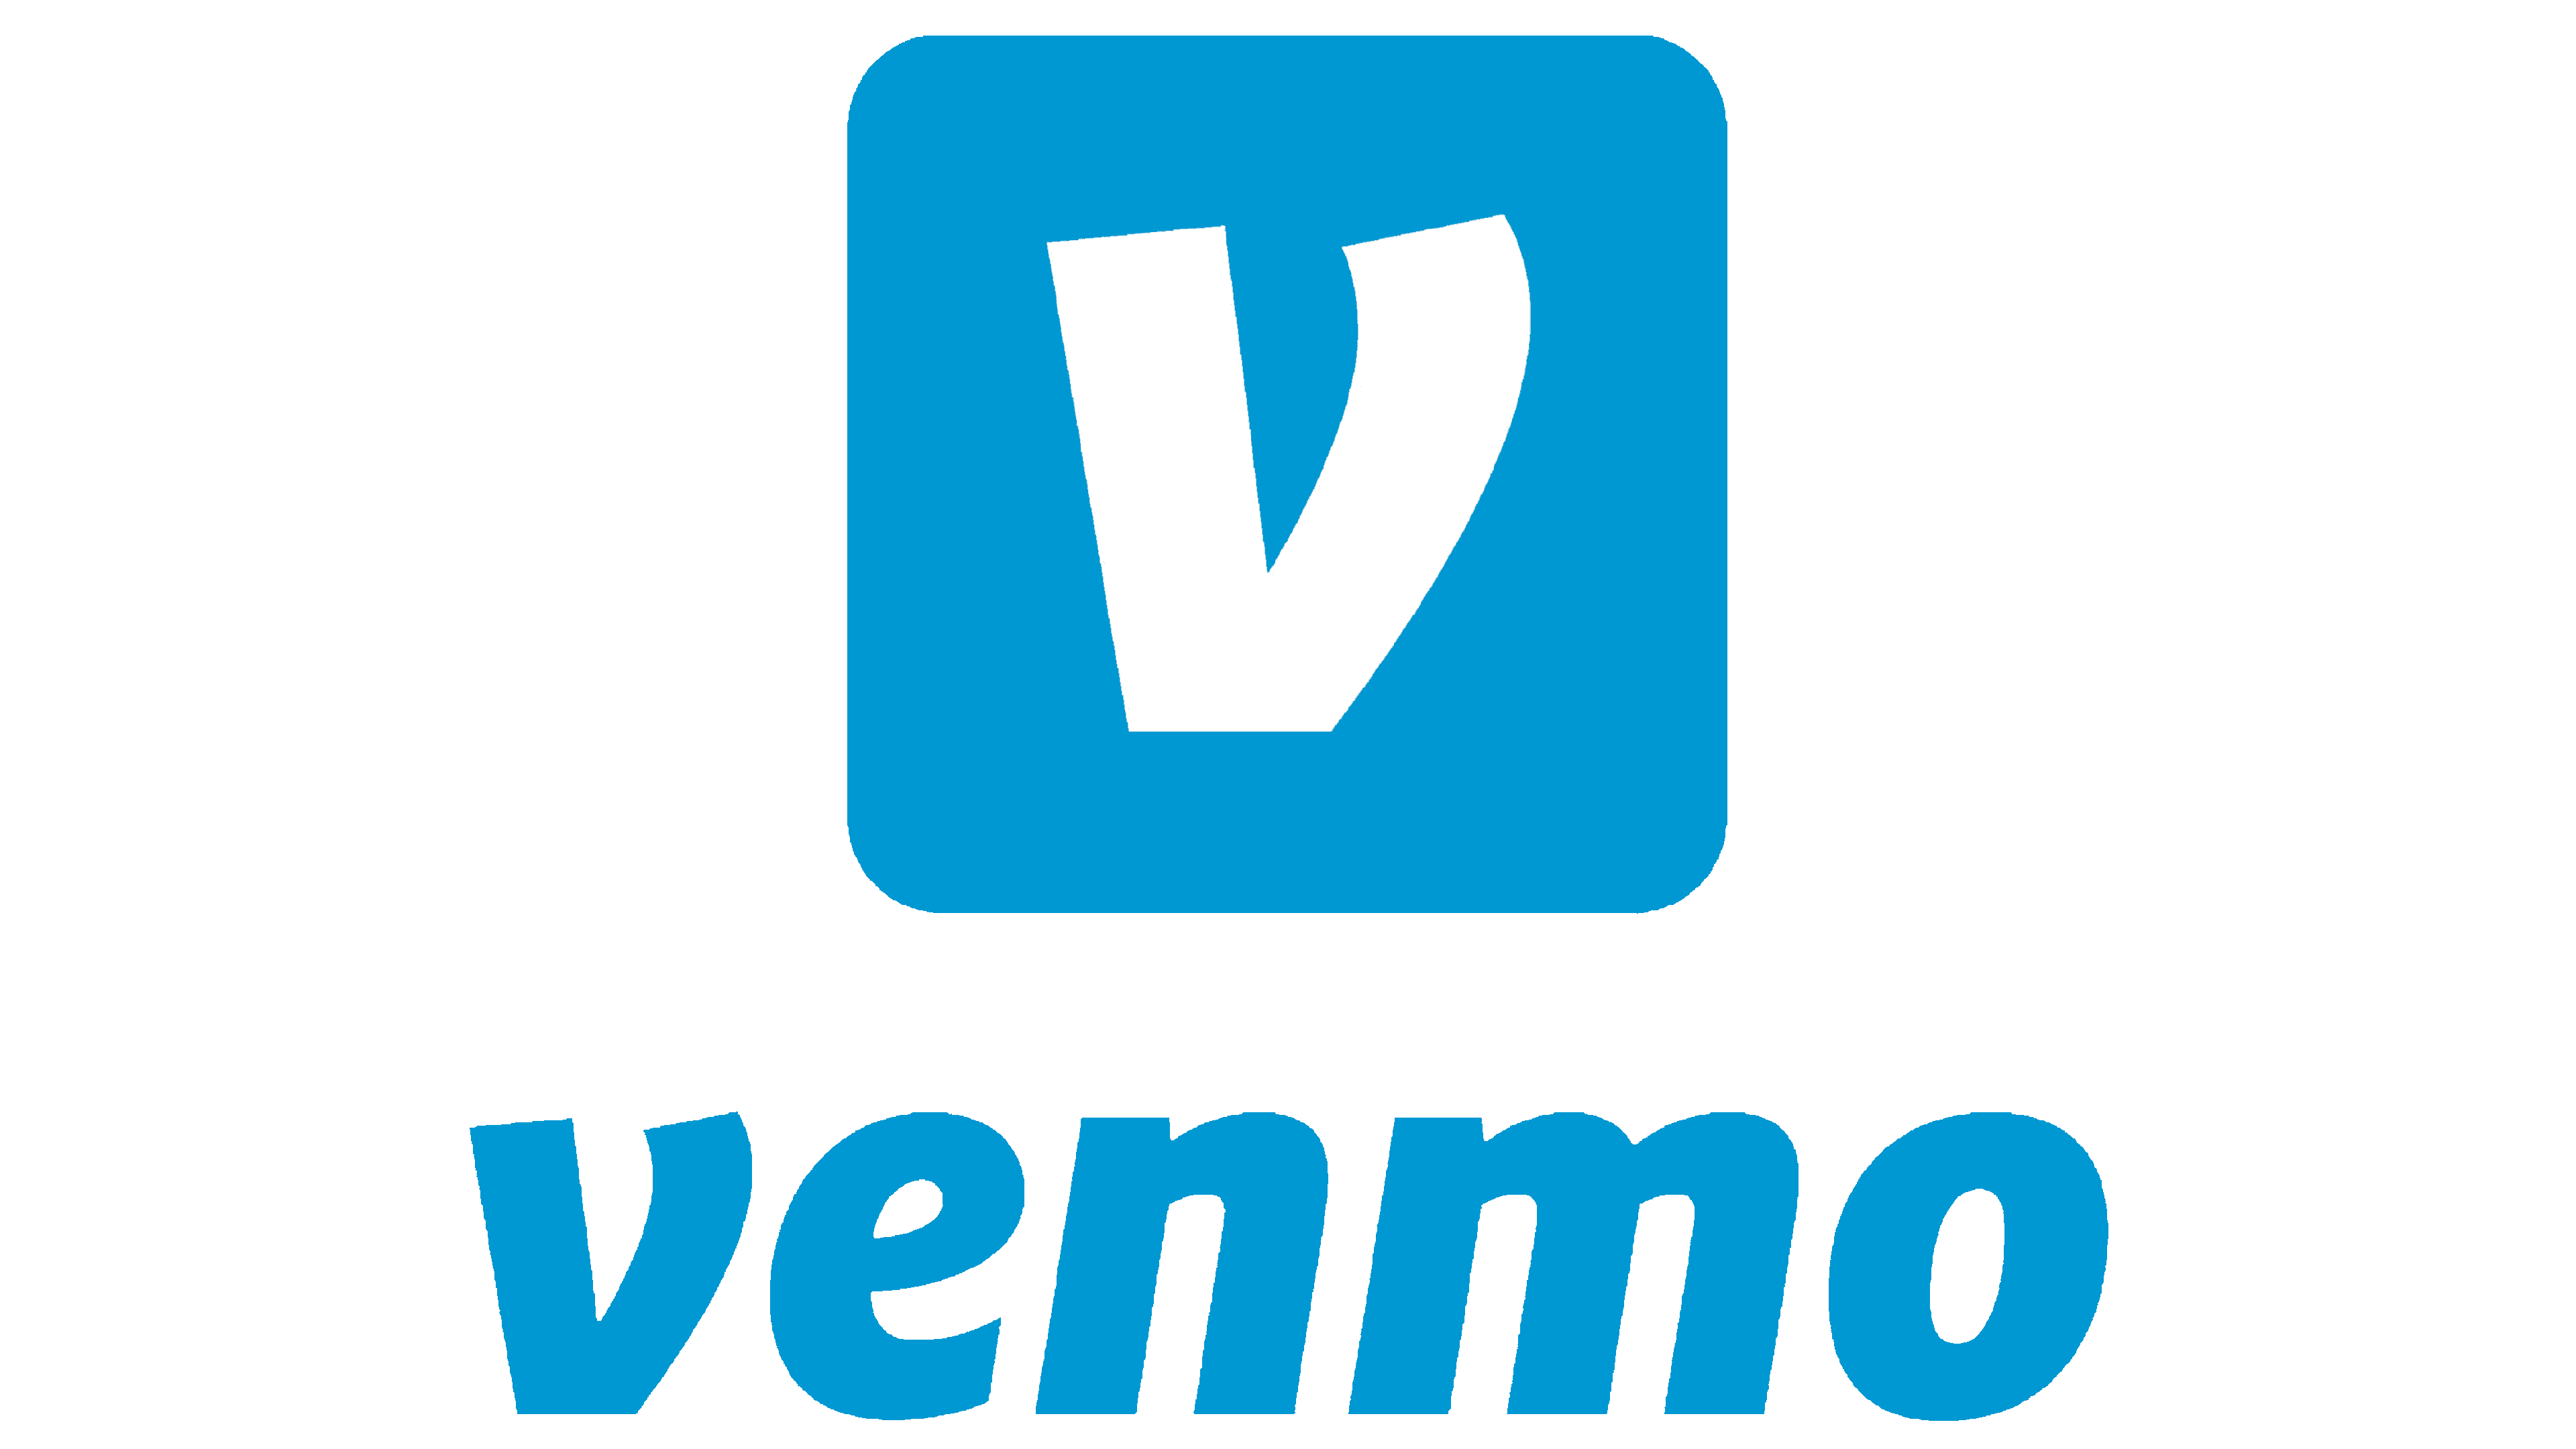 How To Add Vanilla Gift Card to Venmo